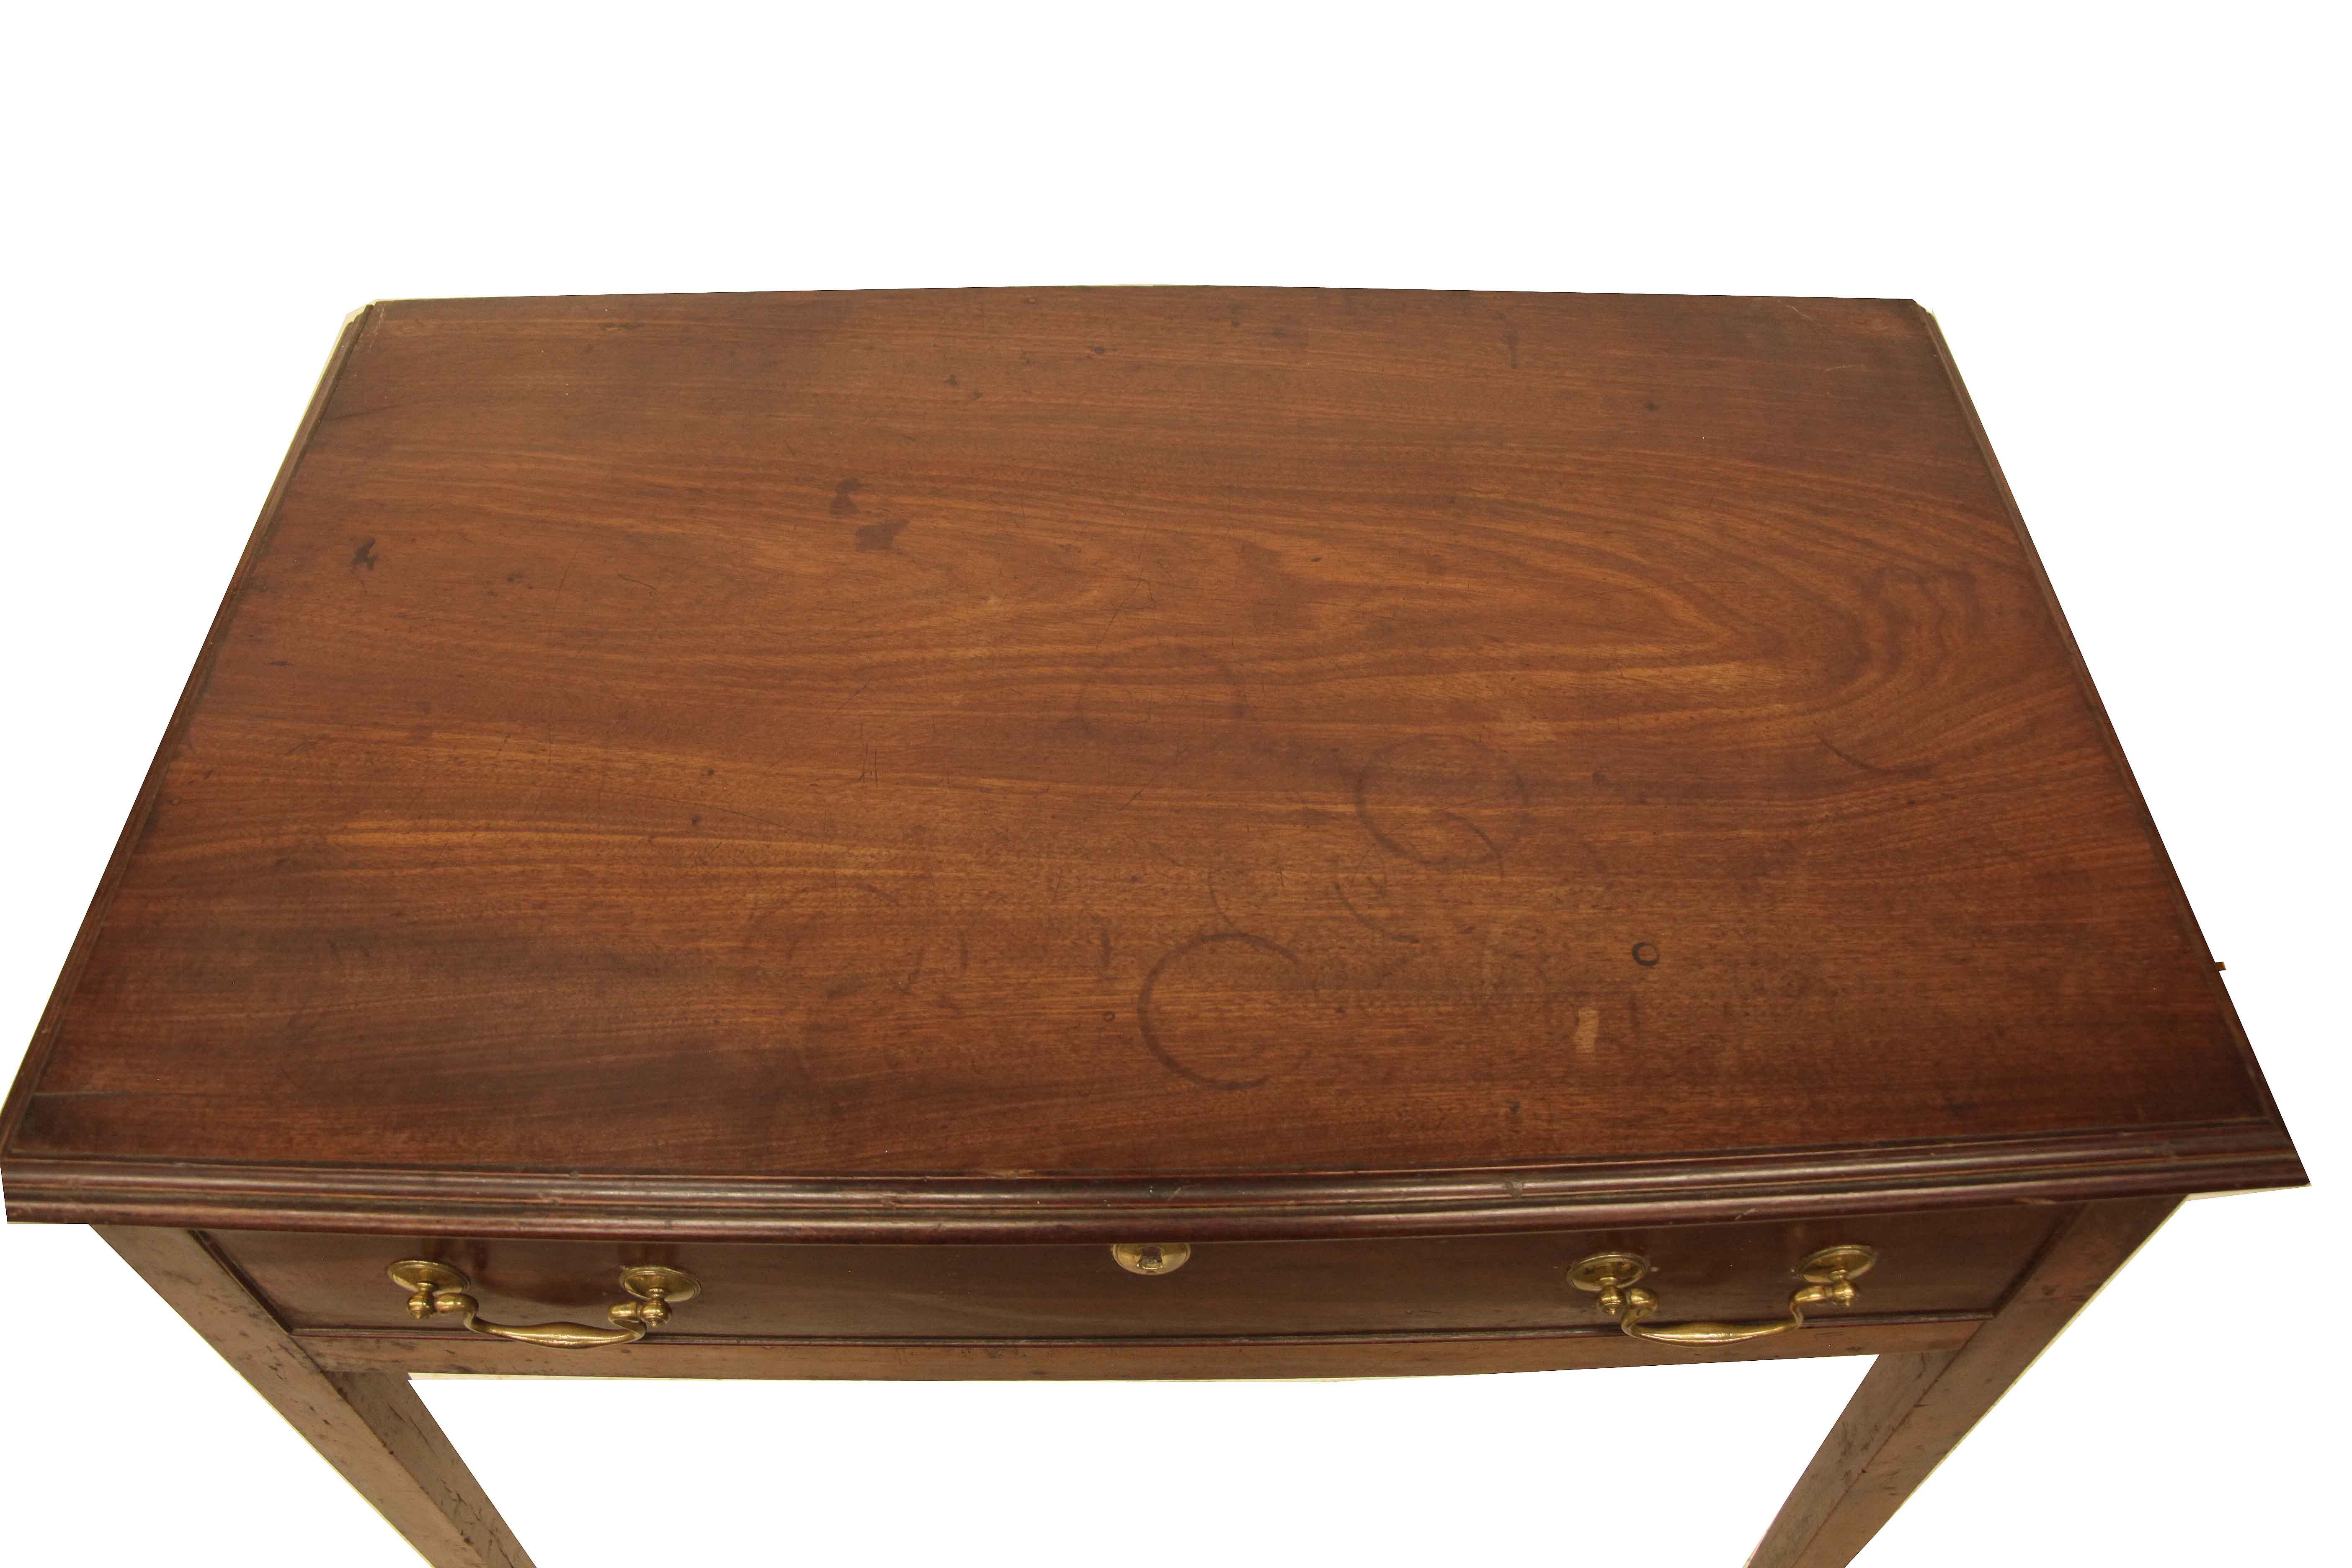 Laiton Table d'appoint George III en vente